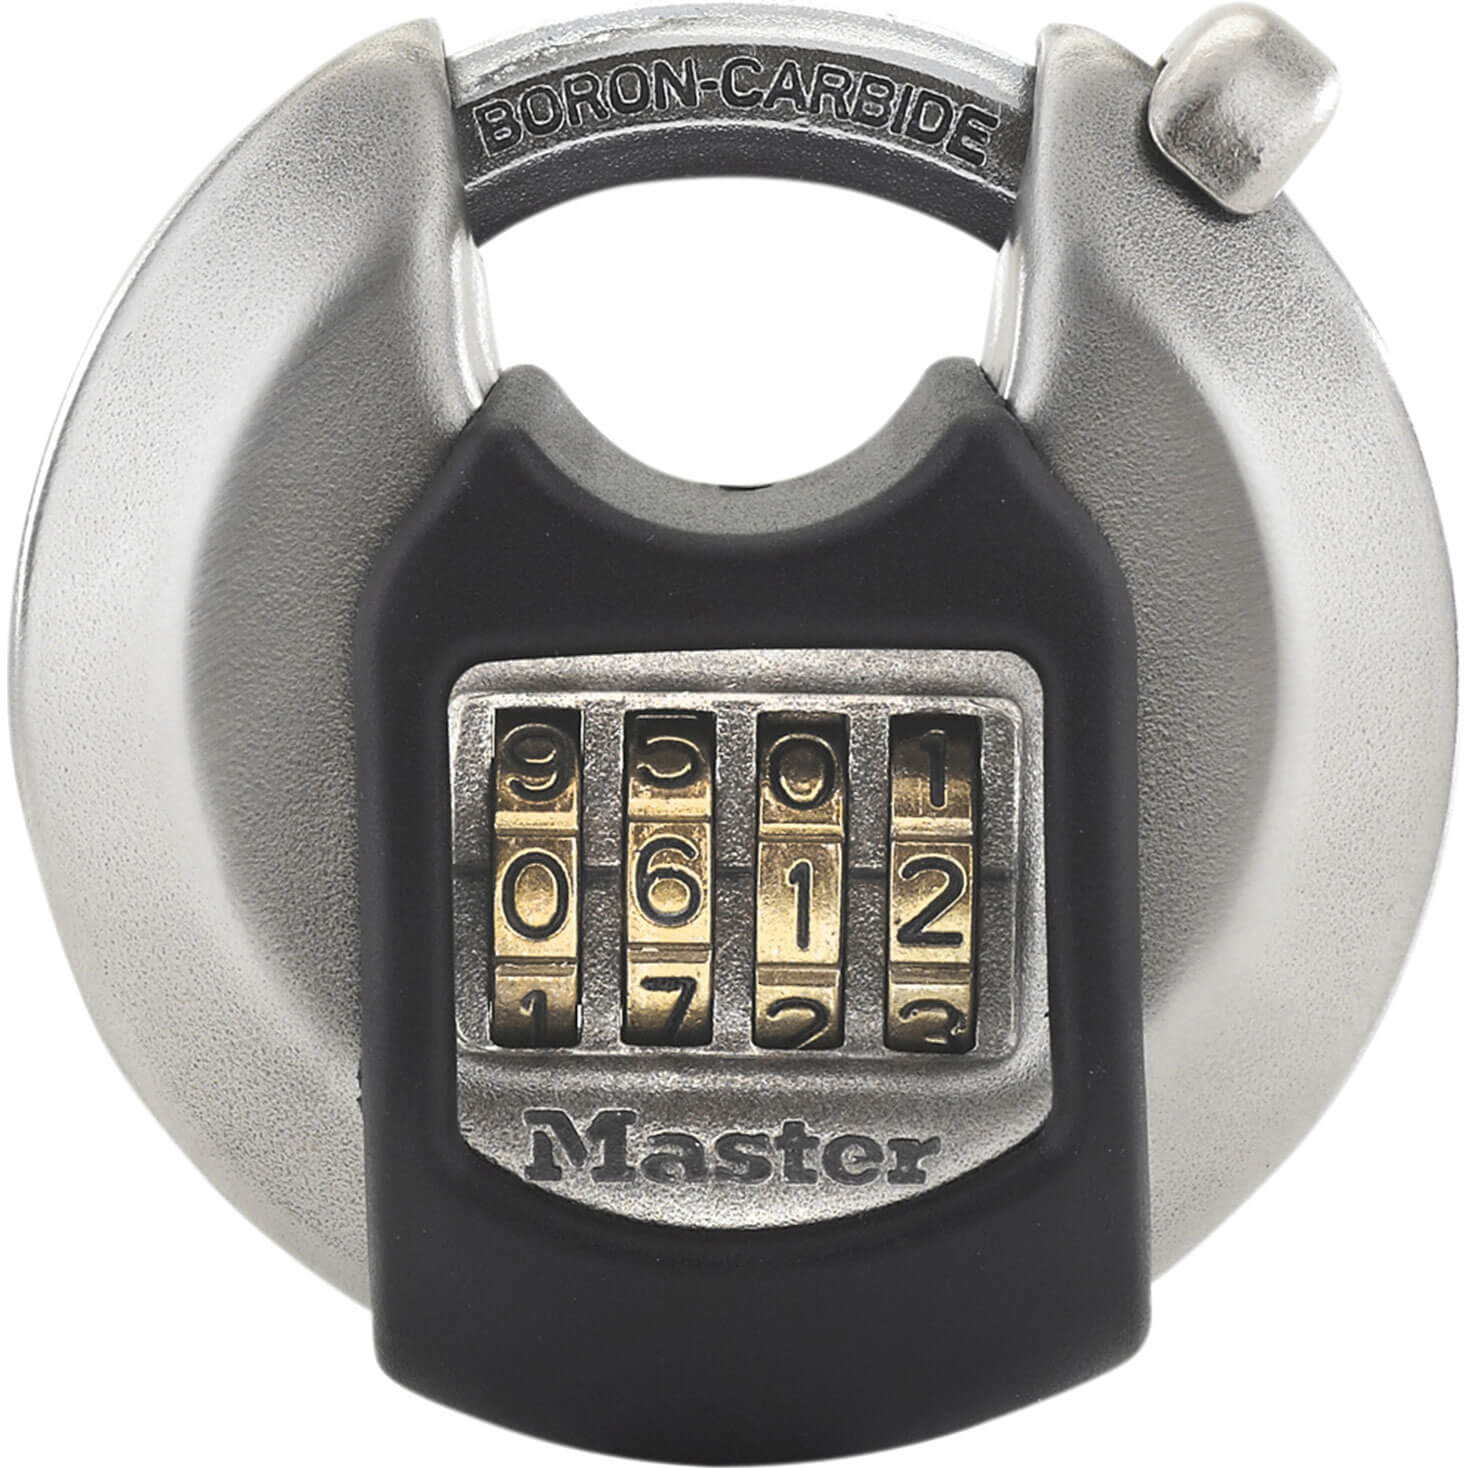 Masterlock Excell Stainless Steel Discus Combination Padlock 70mm Standard